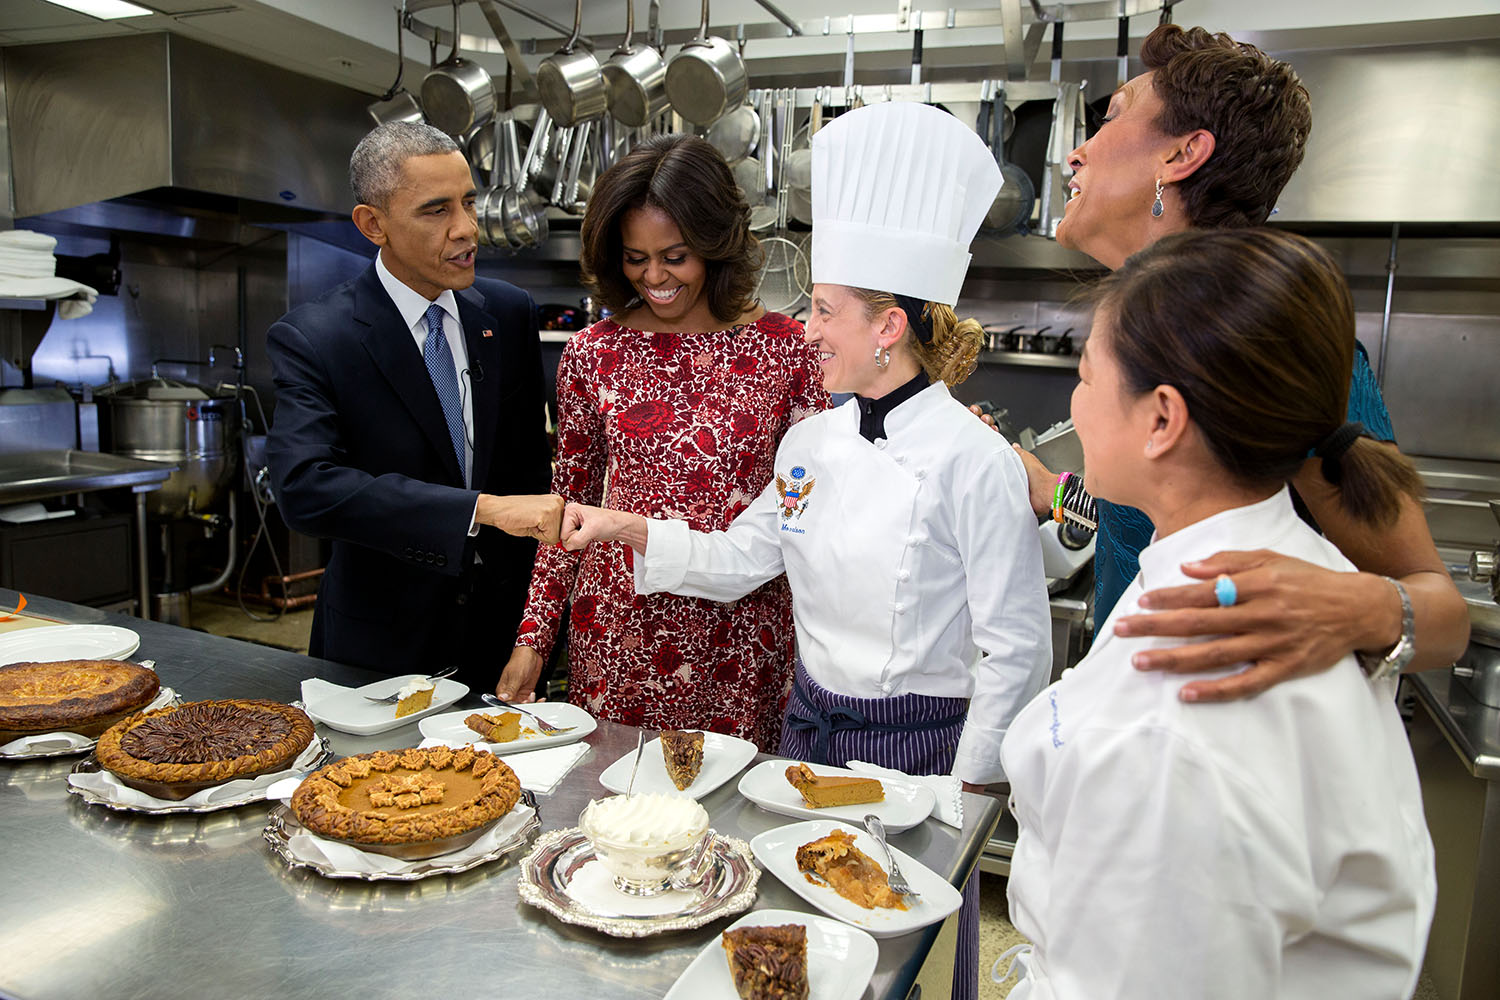 President Barack Obama fist bumps Executive Pastry Chef Susie Morrison after sampling pies with First Lady Michelle Obama, ABC News Anchor Robin Roberts and Executive Chef Cris Comerford during an interview about Thanksgiving in the White House Kitchen, Nov. 19, 2014. (Pete Souza—The White House)